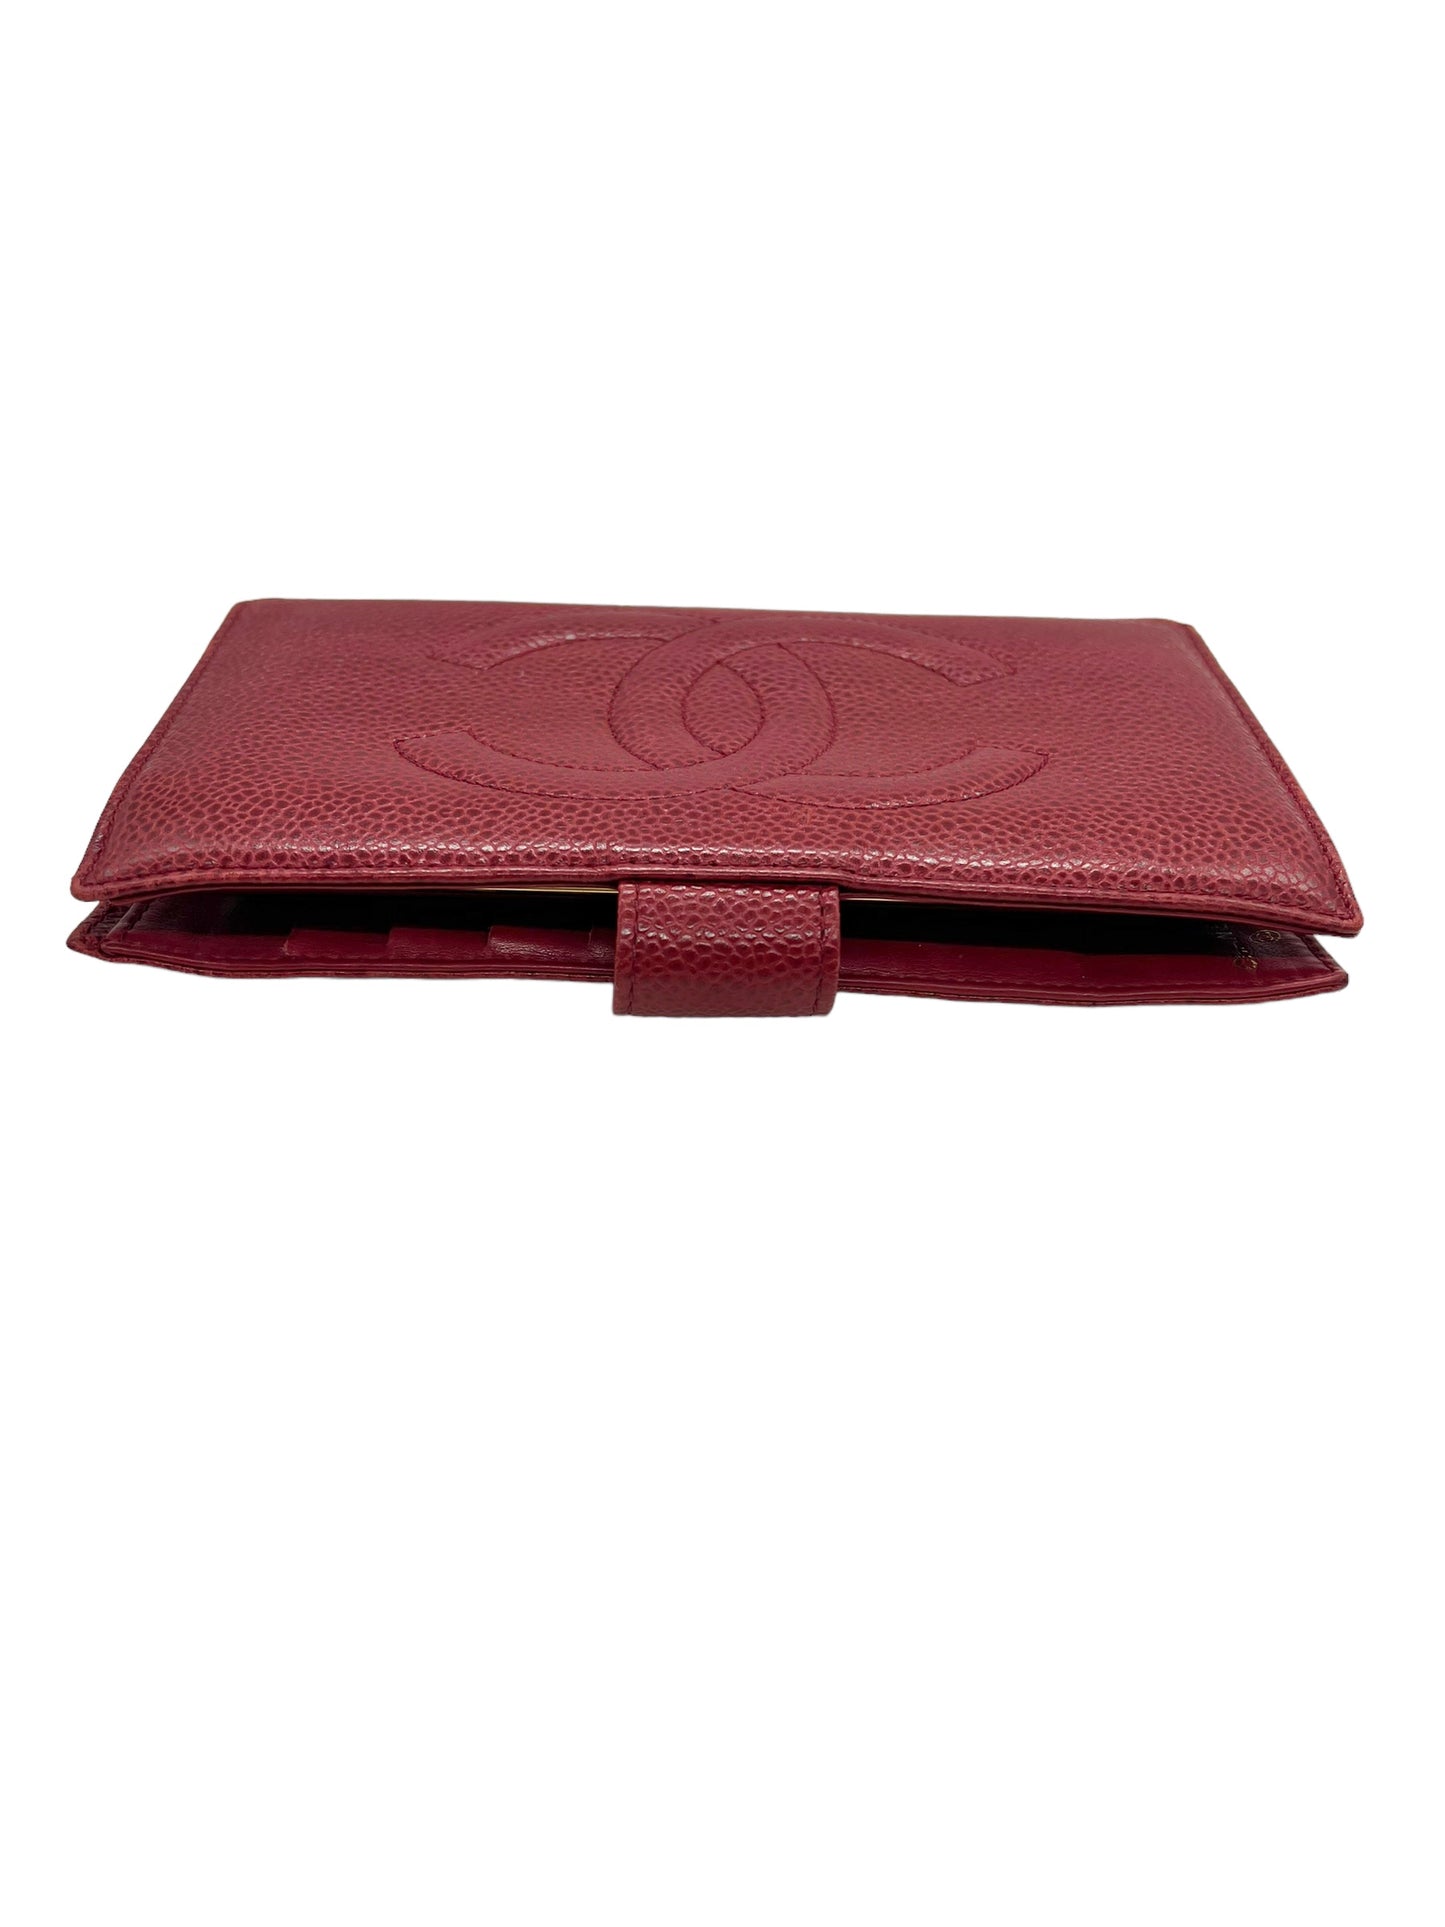 Chanel Red Caviar Vintage 1991-1994 Timeless French Purse Wallet